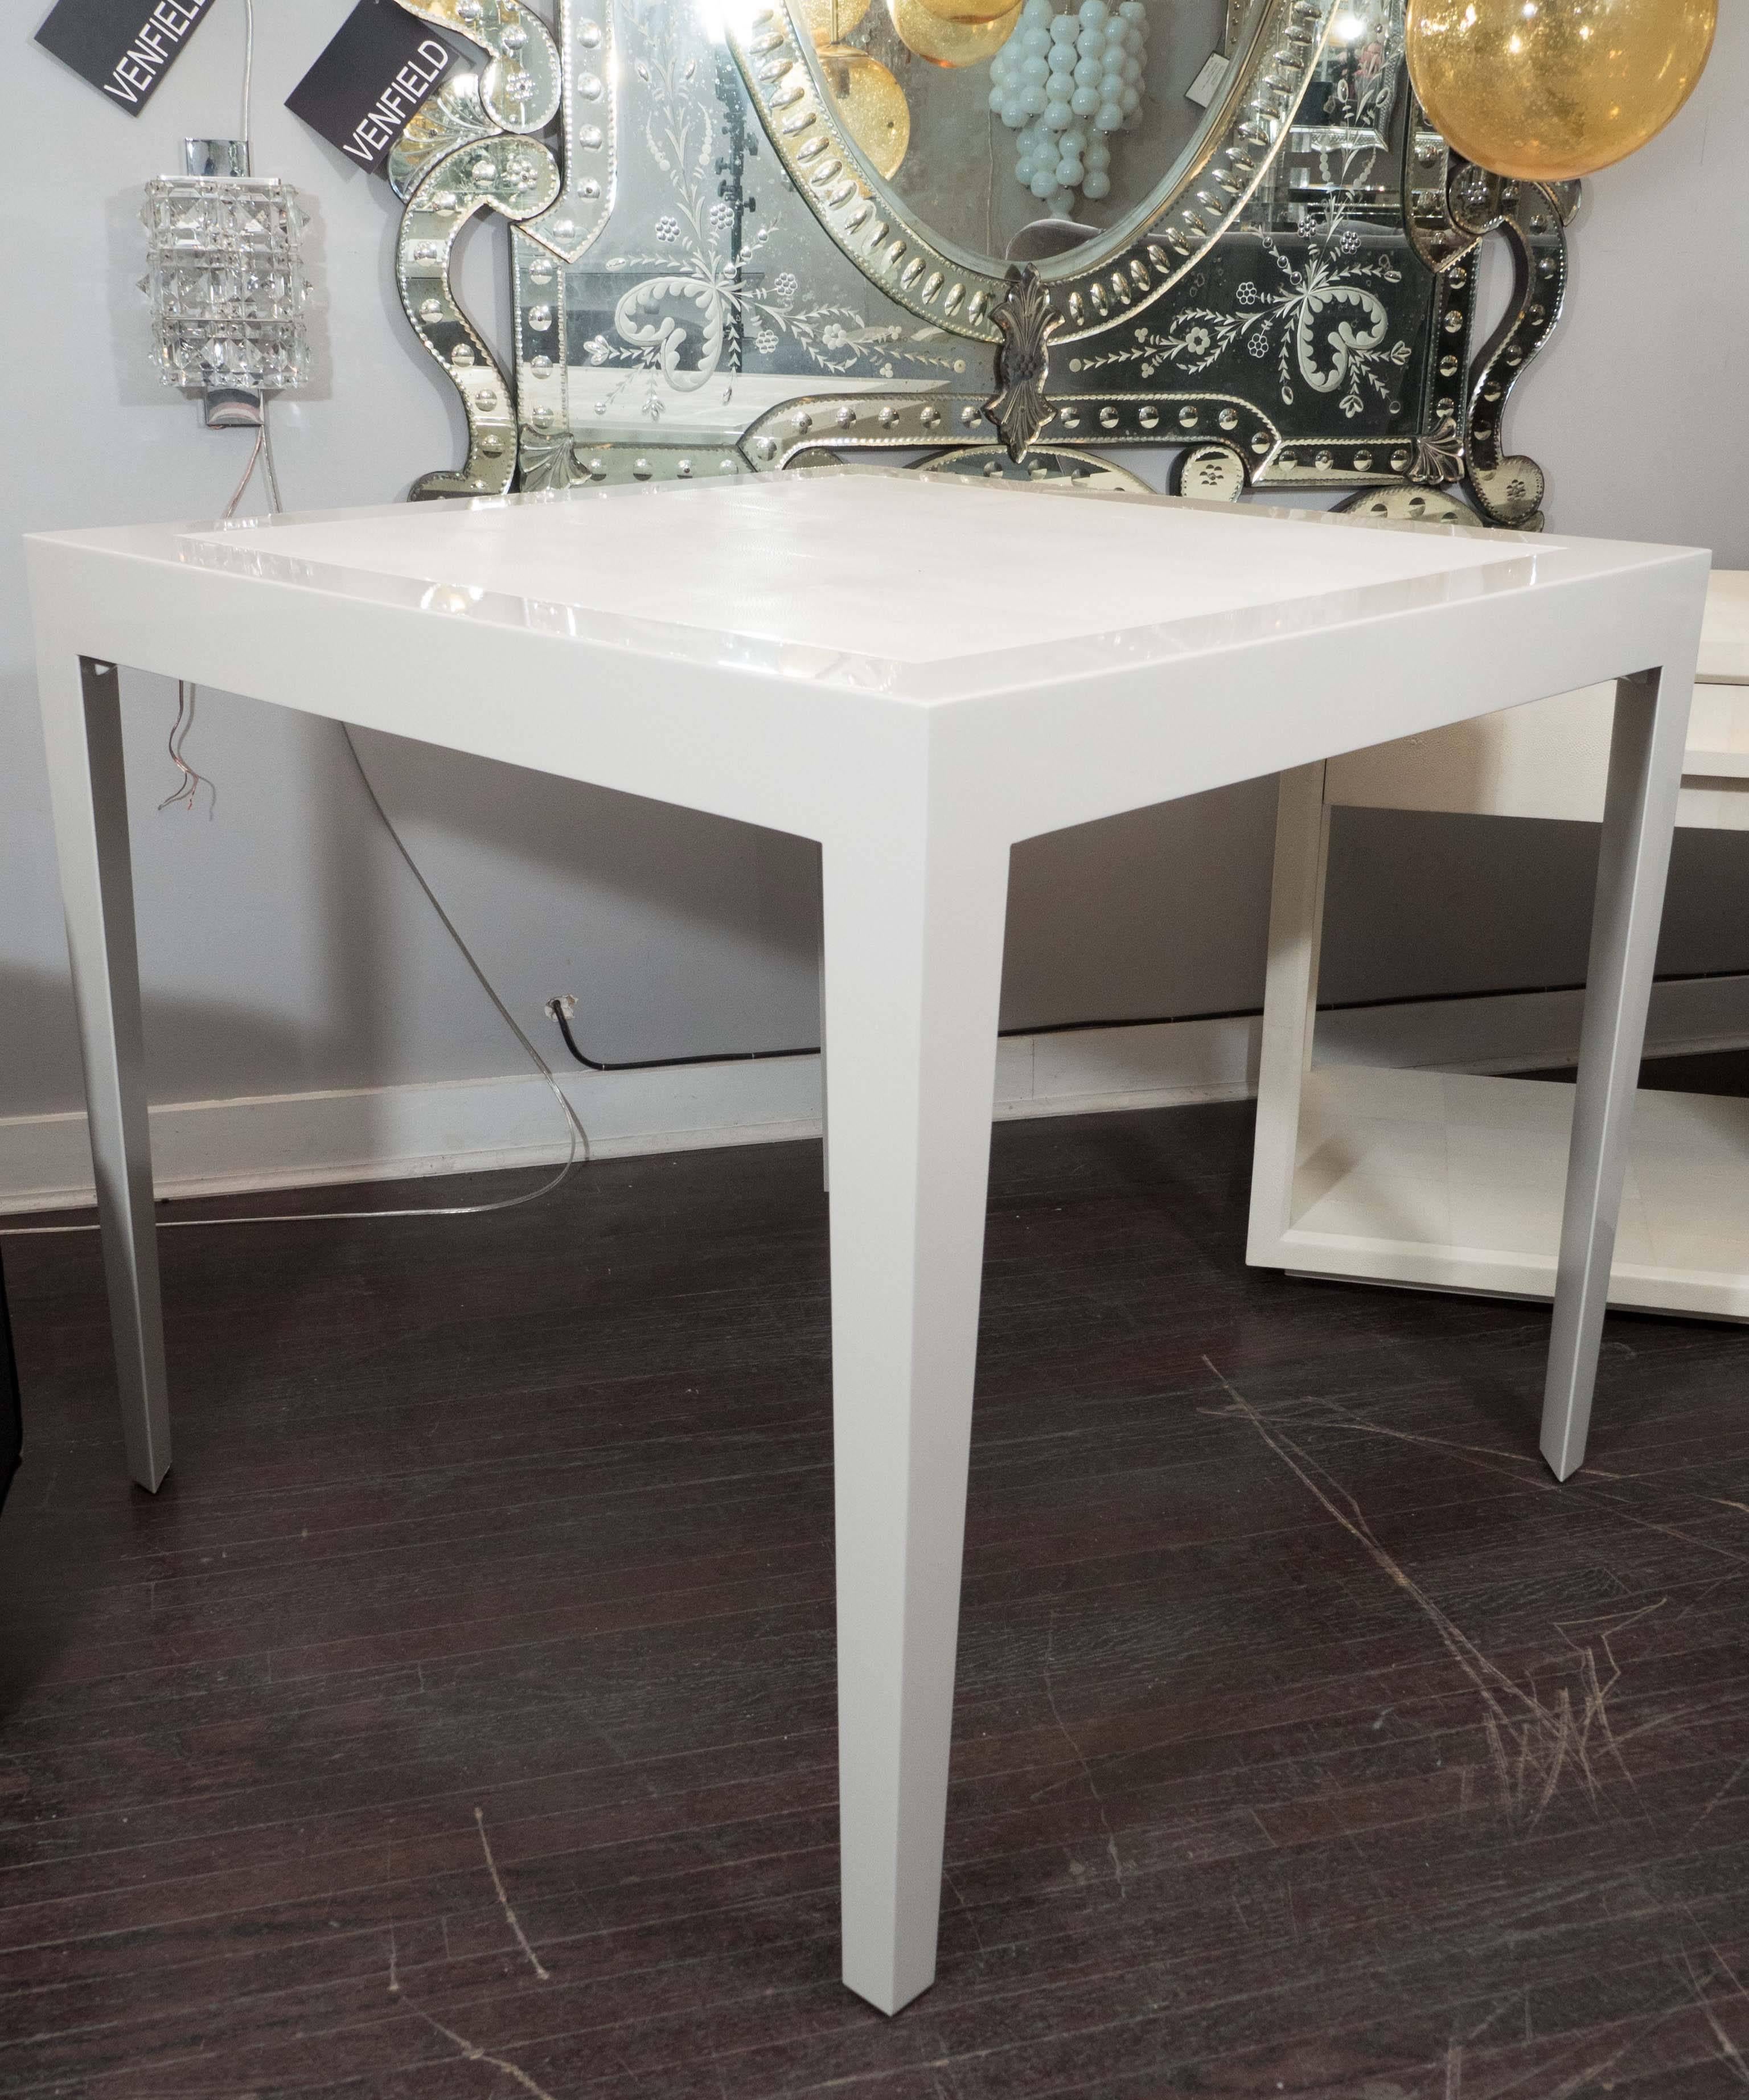 Custom, made to order ivory lacquer games table with water gray shagreen inset top trimmed with bone inlay.  

For finish and color options please inquire with Venfield, 